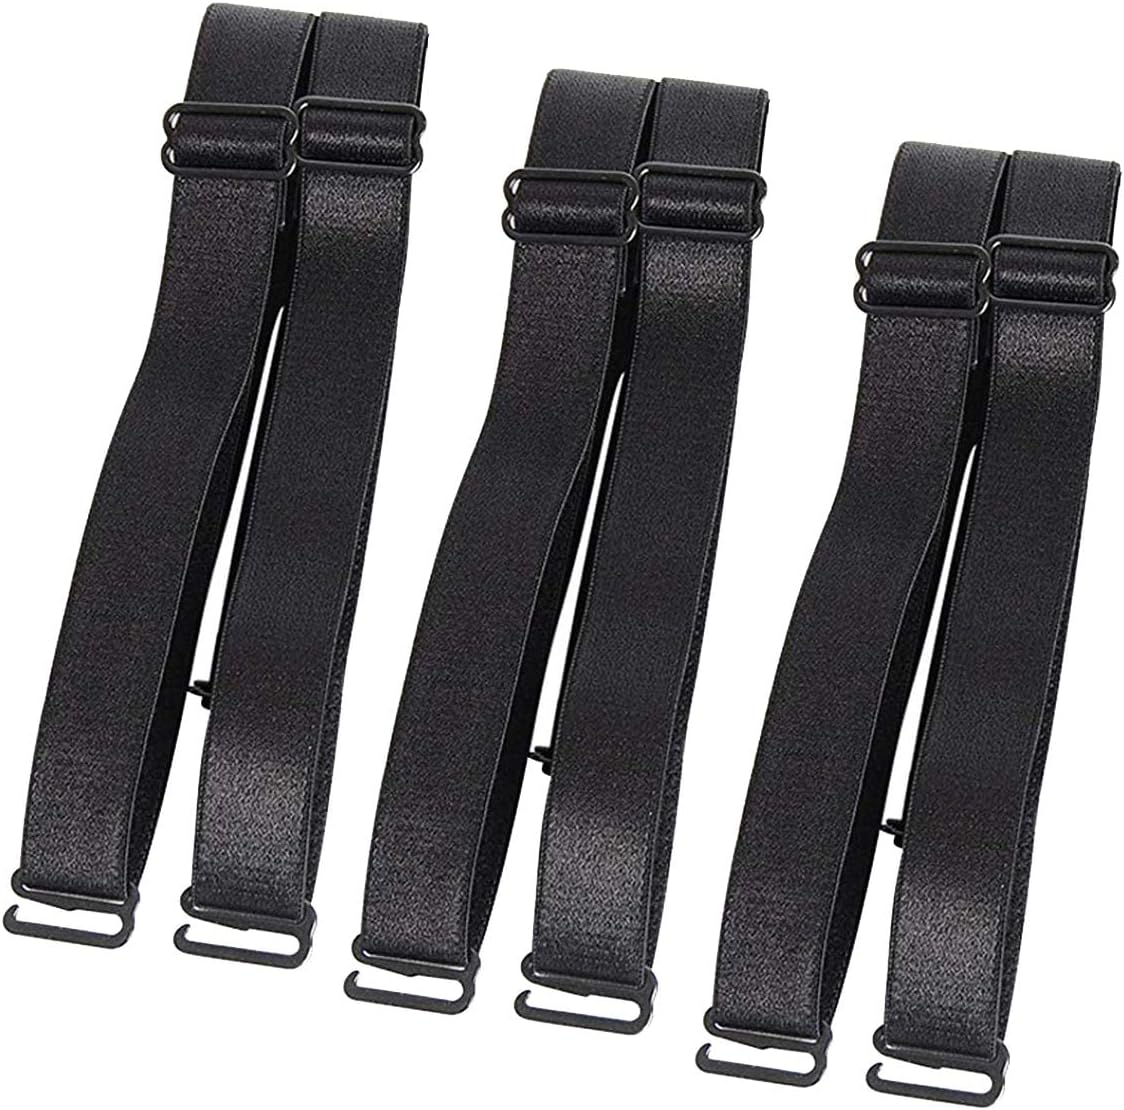 3Pairs Bra Shoulder Strap Replacement 12mm 15mm 18mm Width Elastic Adjustable Removable Multi Color